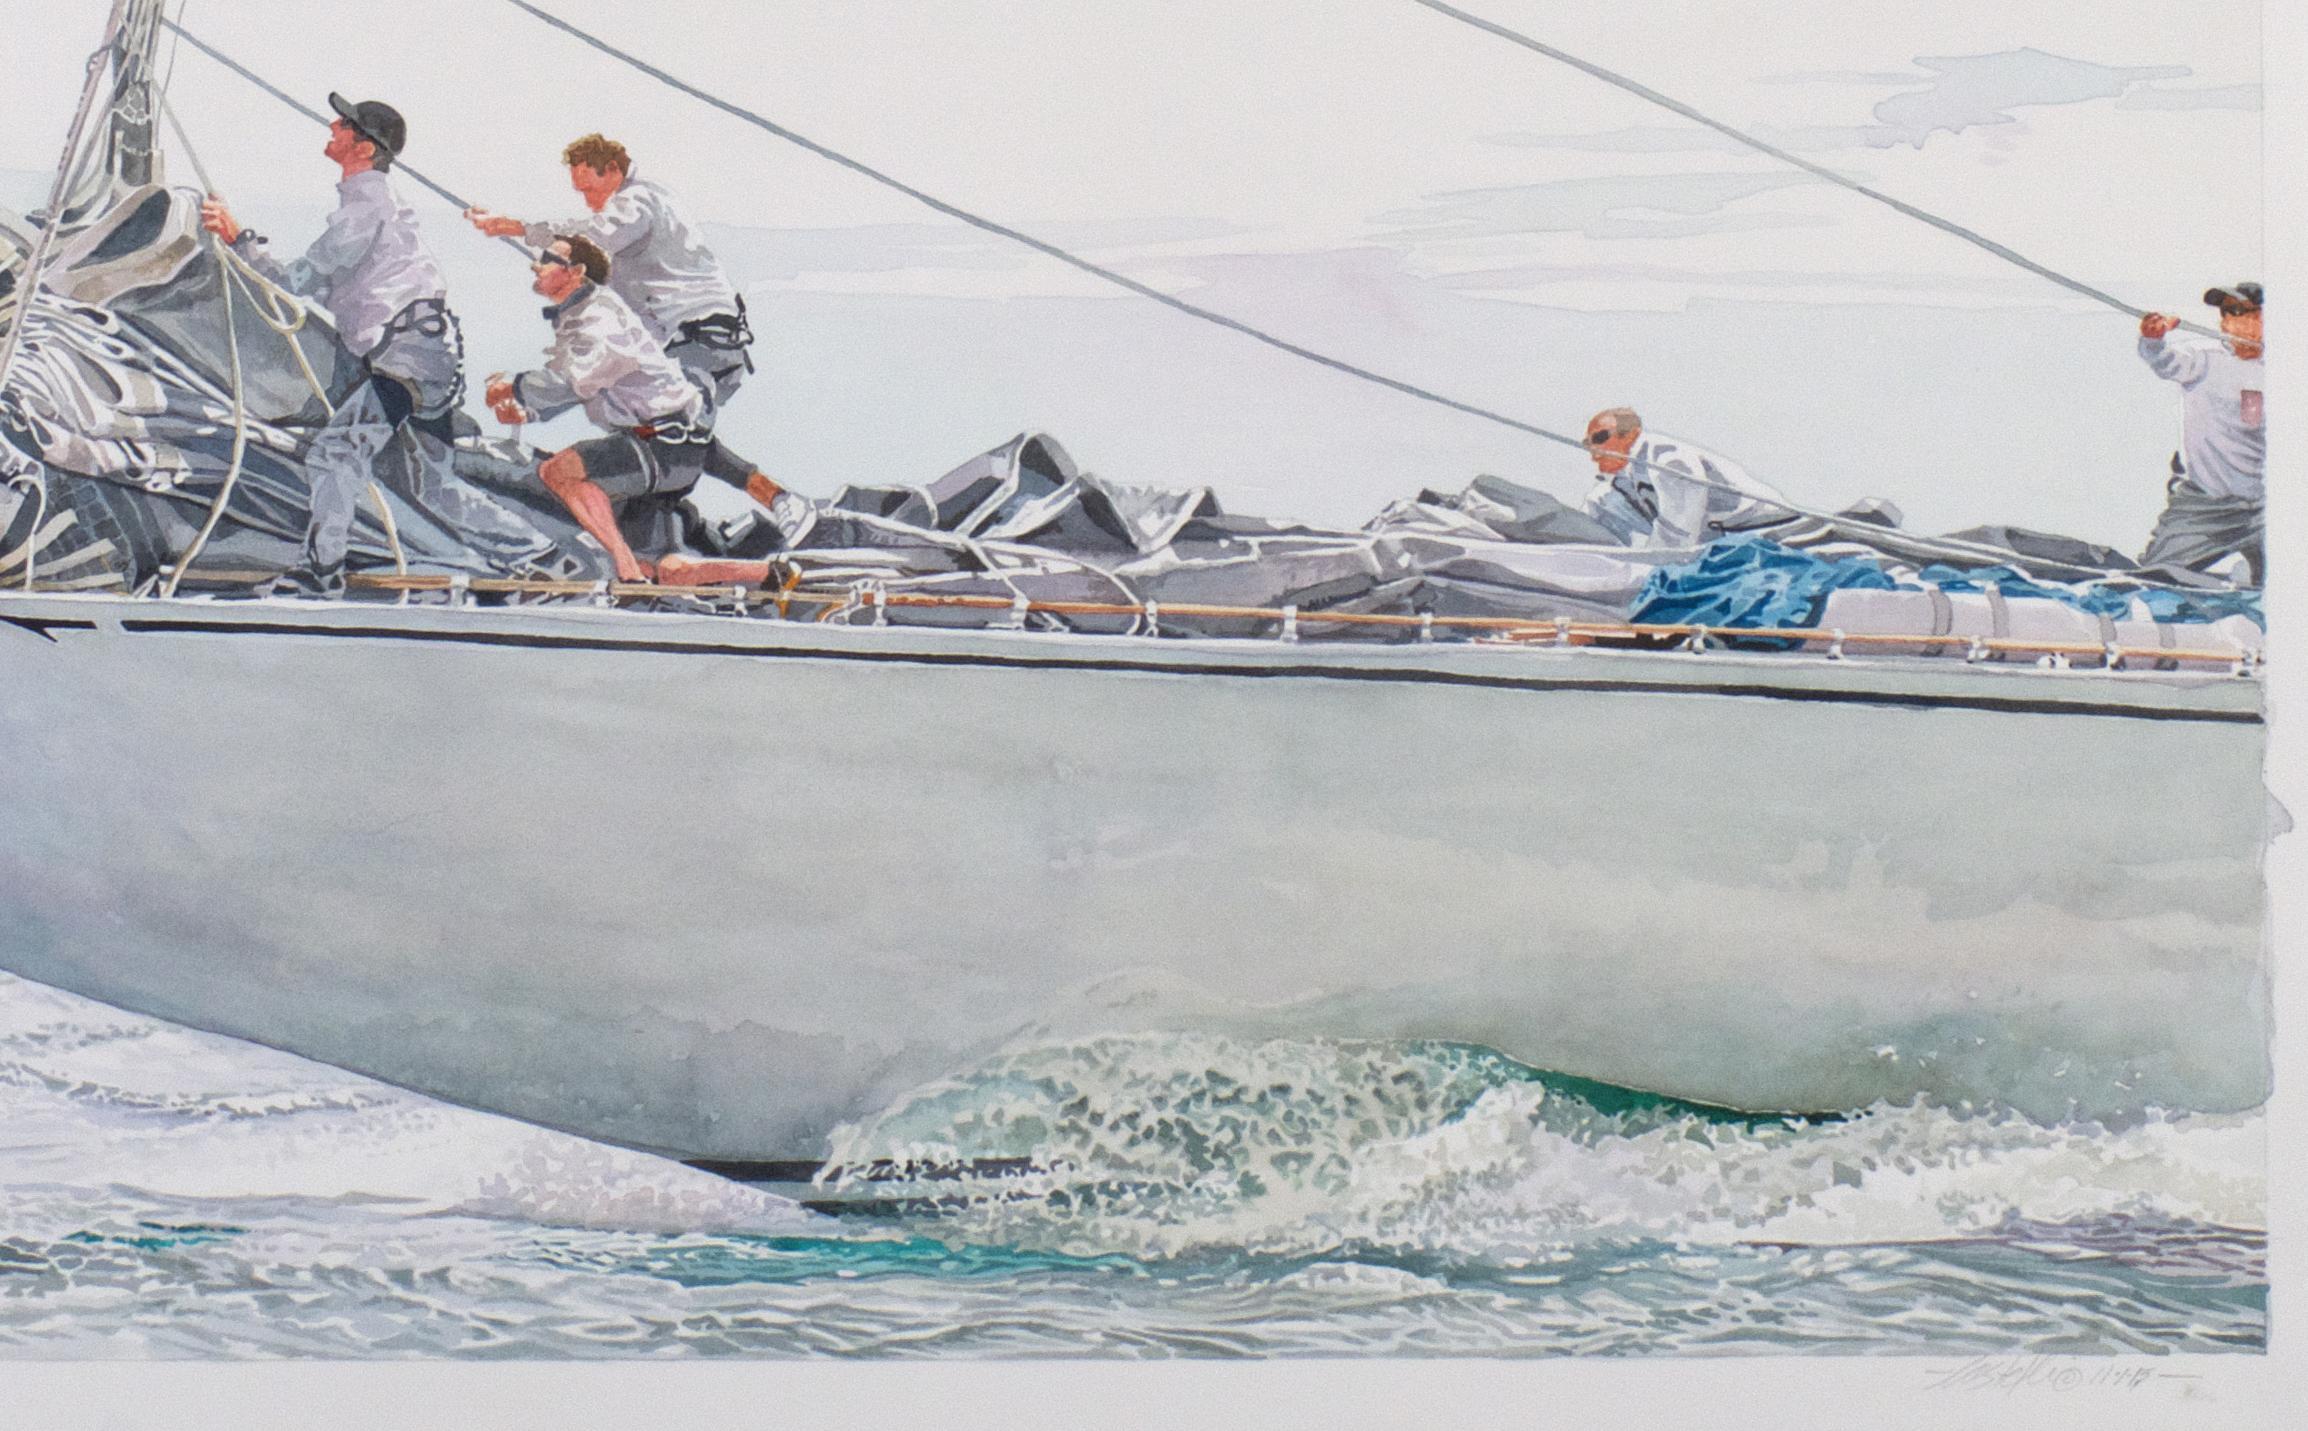 Trimming the Corner- J-Class Yacht Ranger - American Realist Painting by Marc Castelli